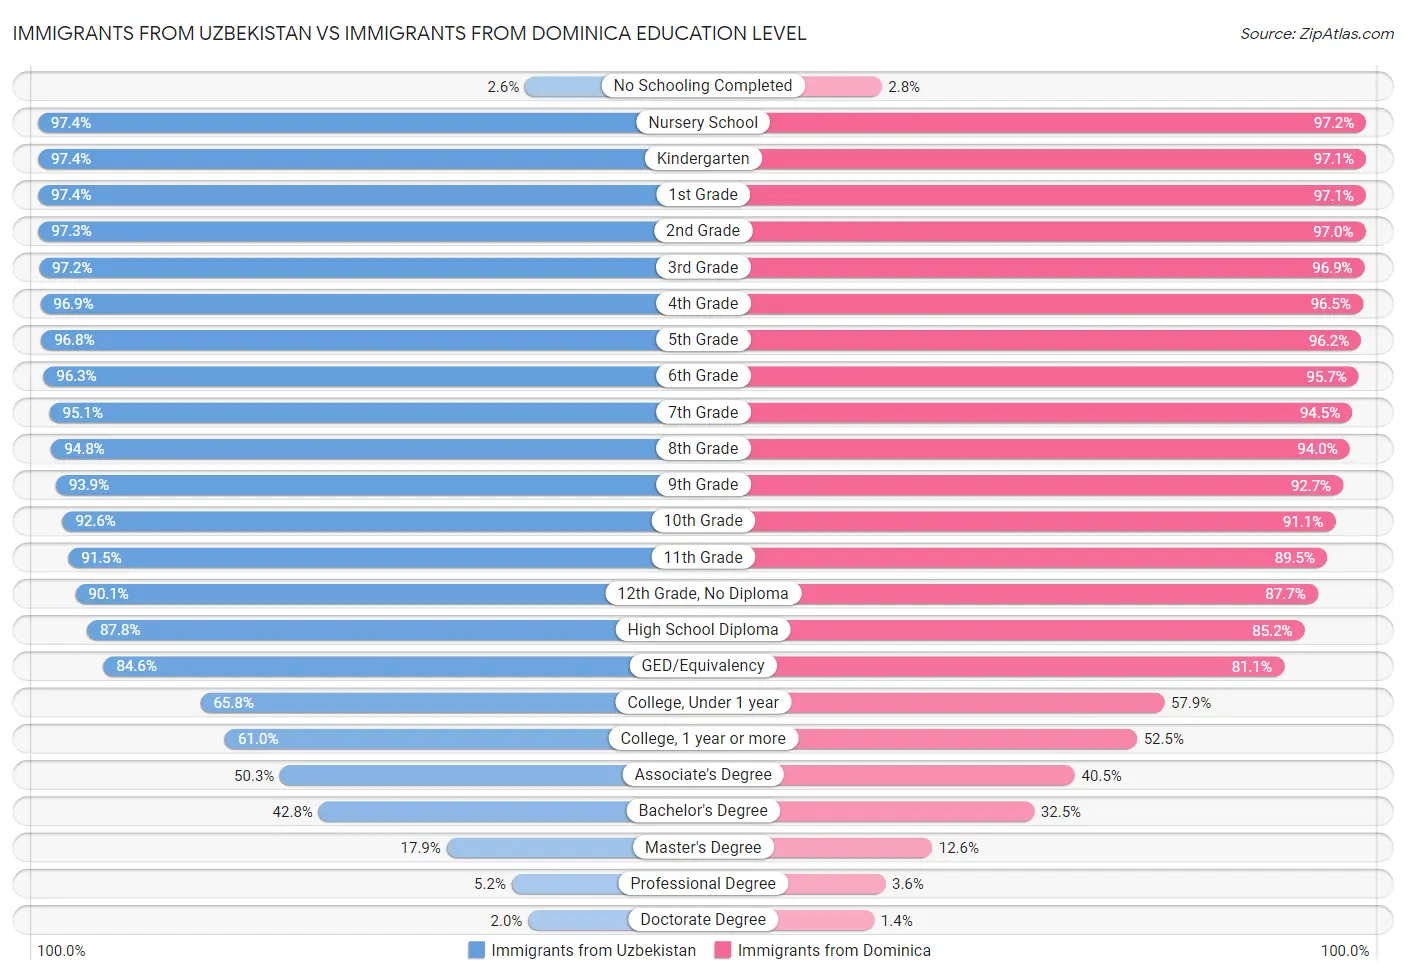 Immigrants from Uzbekistan vs Immigrants from Dominica Education Level